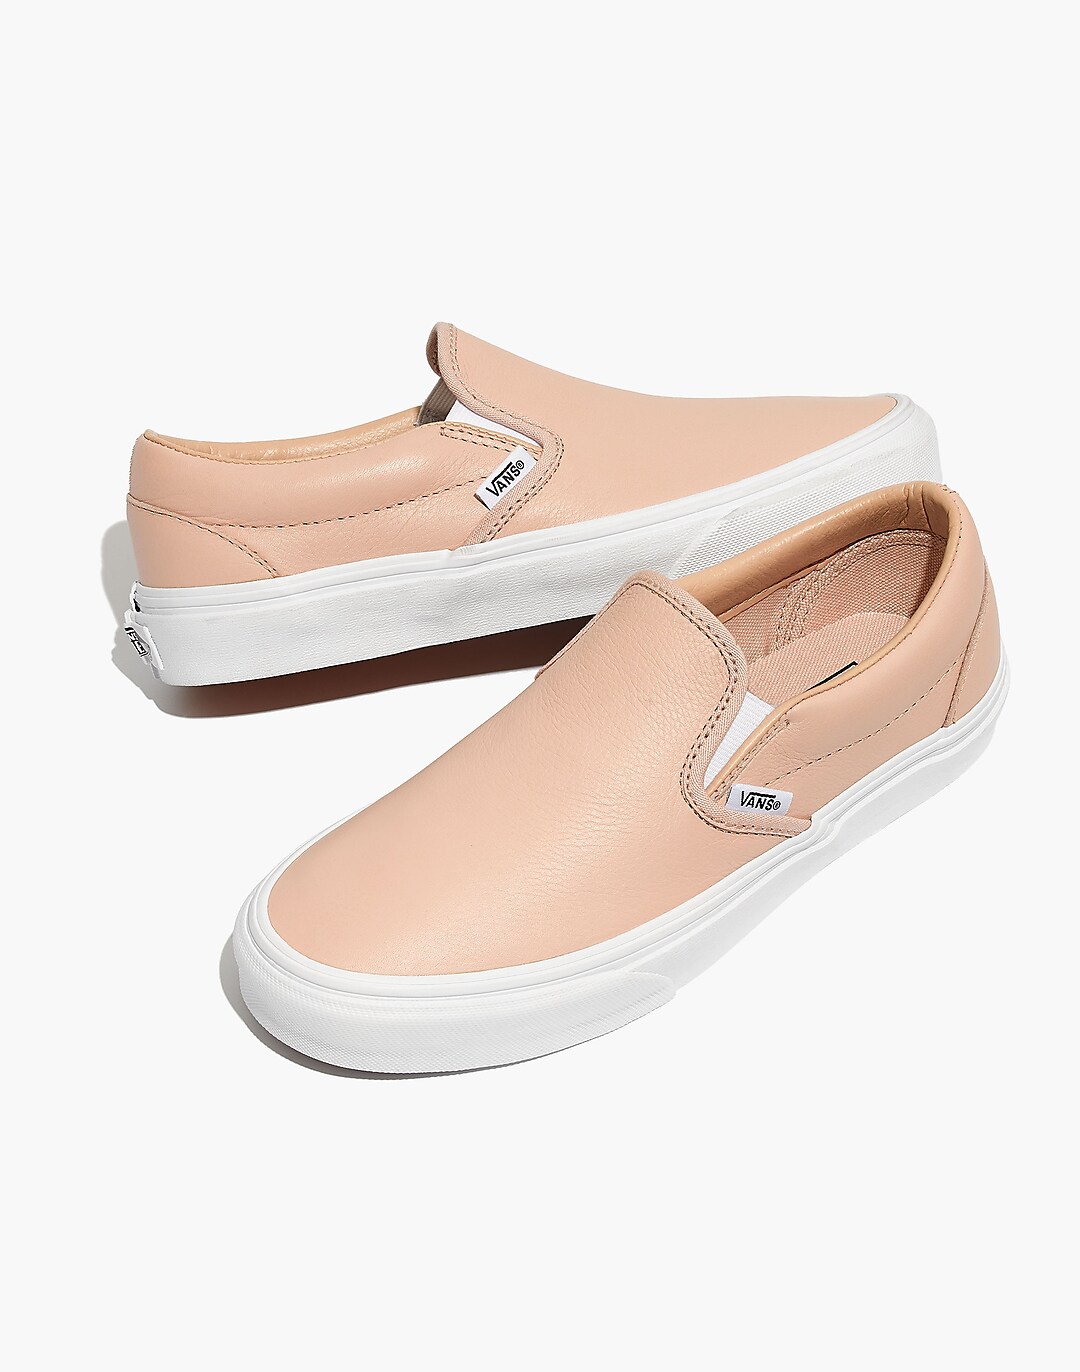 Vans® Unisex Classic in Frappe Leather